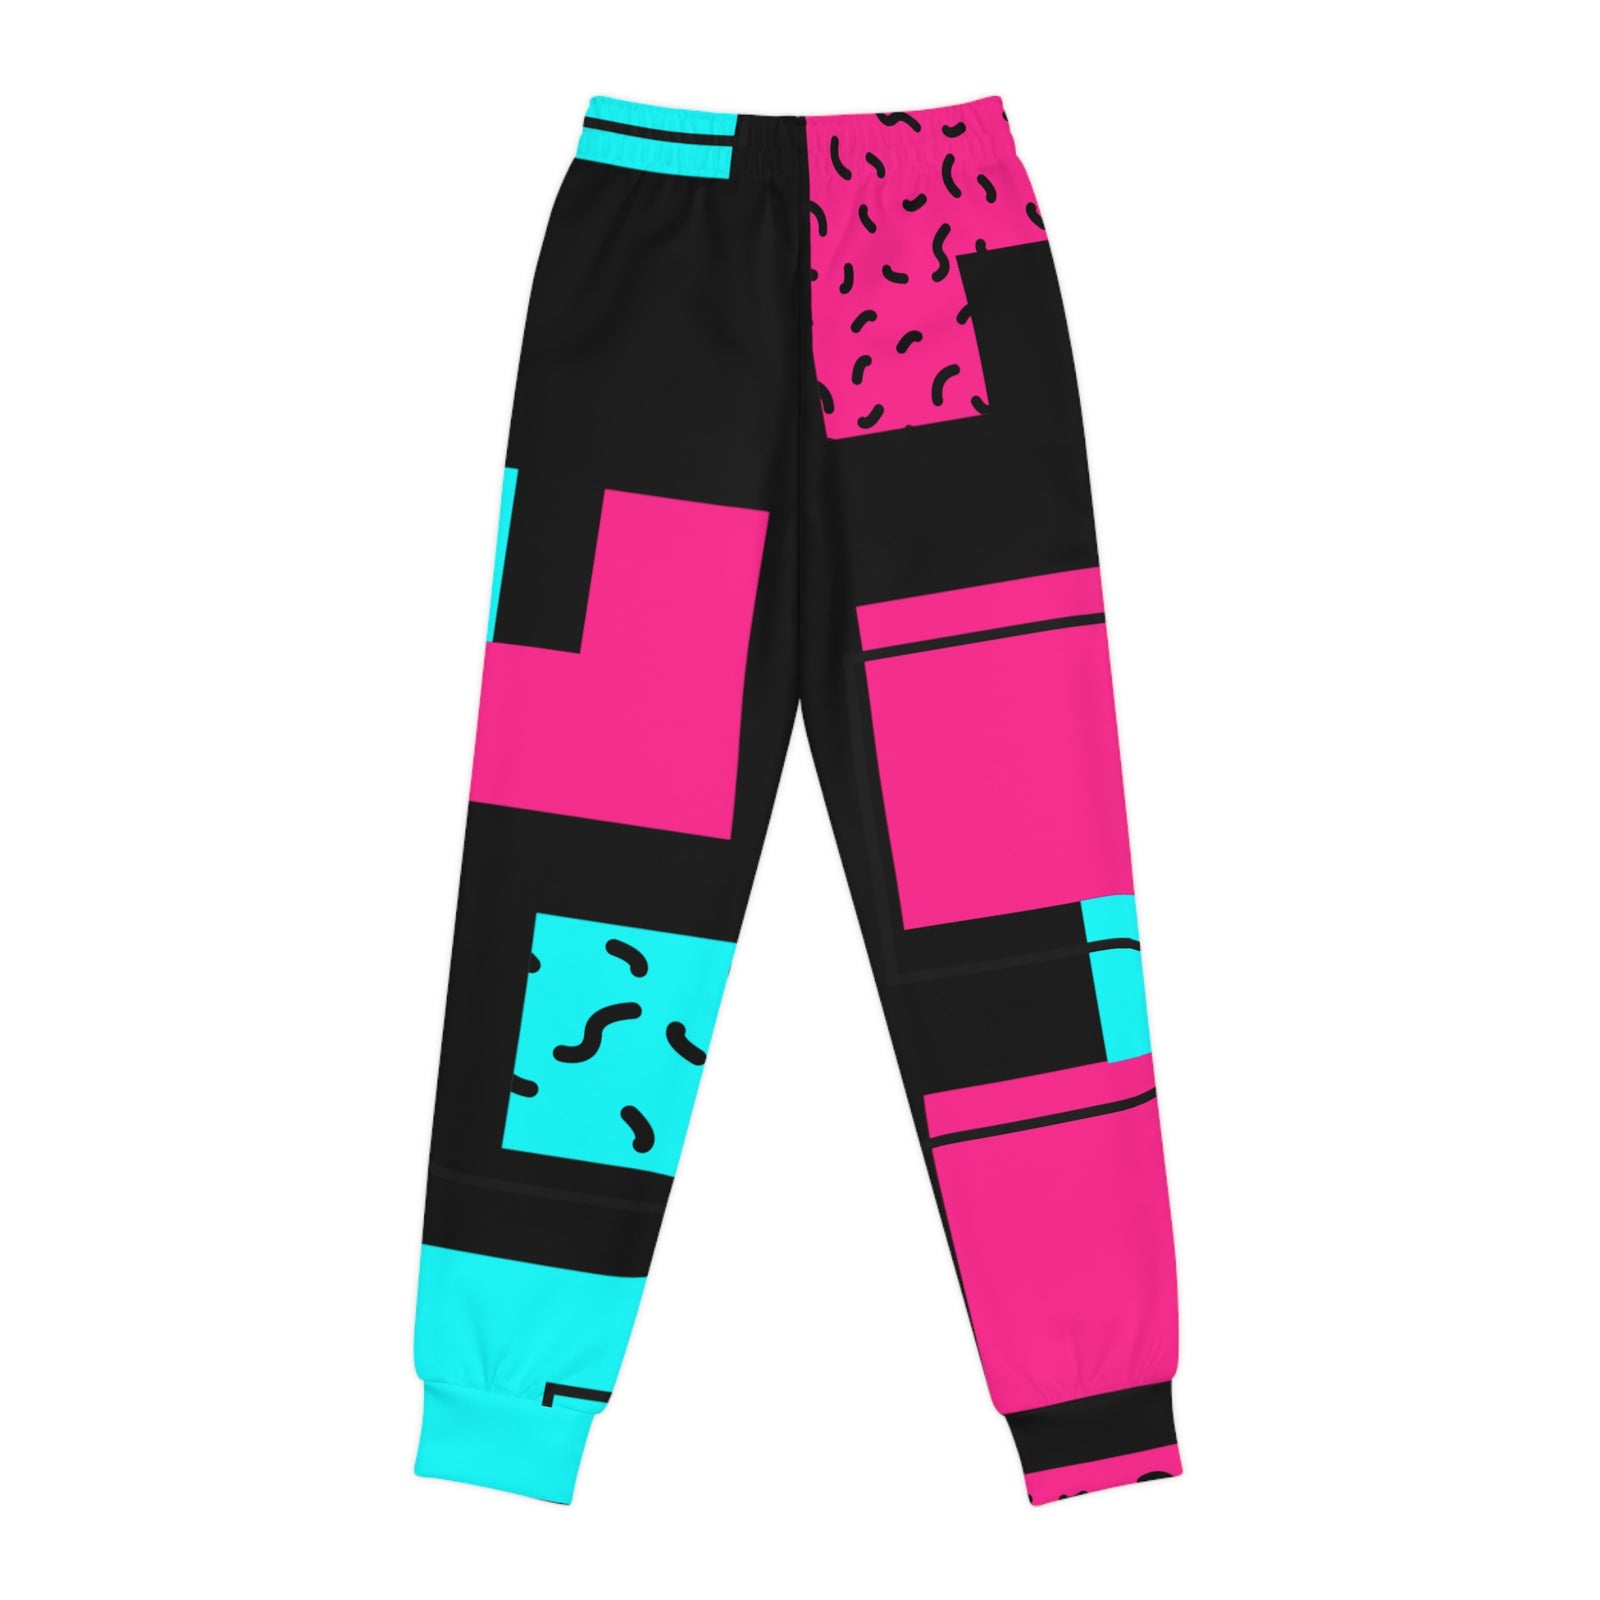 TryKid Logo Youth Joggers featuring a Distinctive Trending Pattern (All-Over Print) for Stylish Comfort